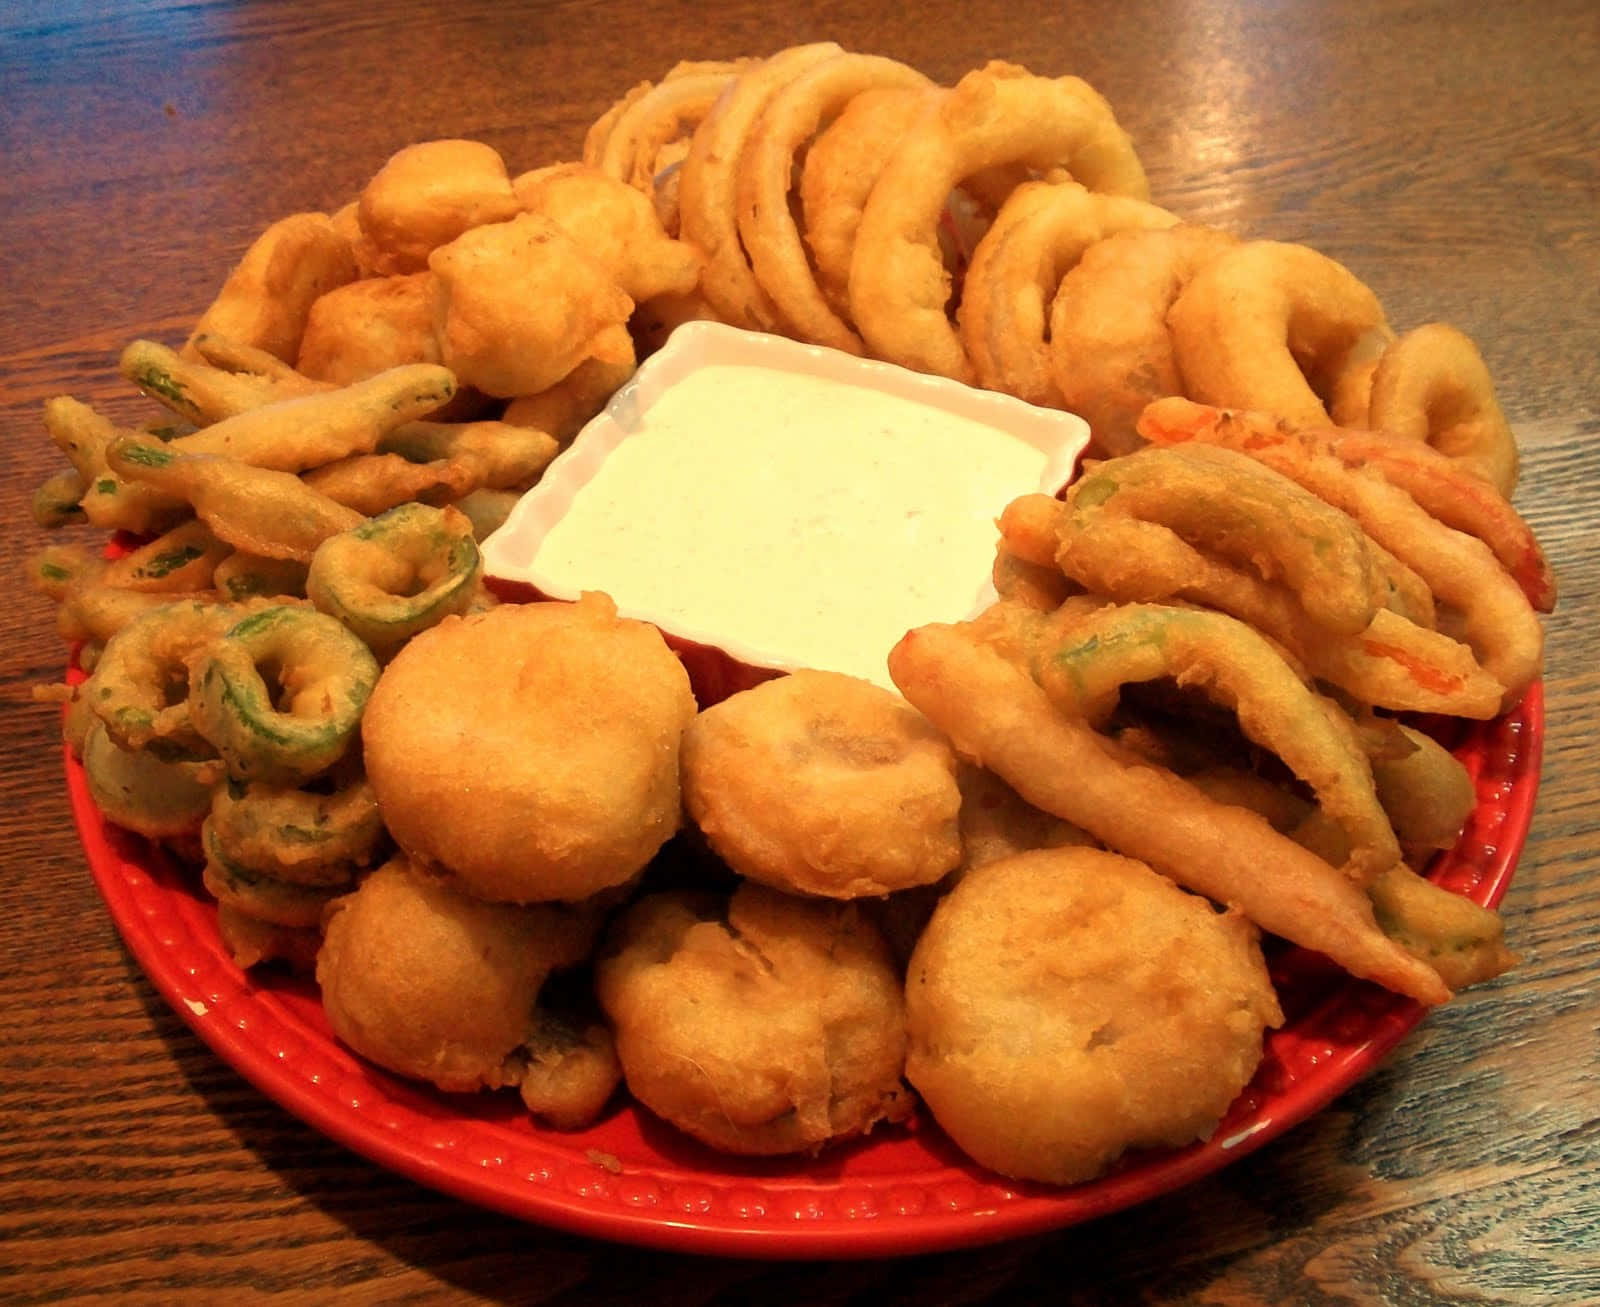 A Red Plate With Fried Food